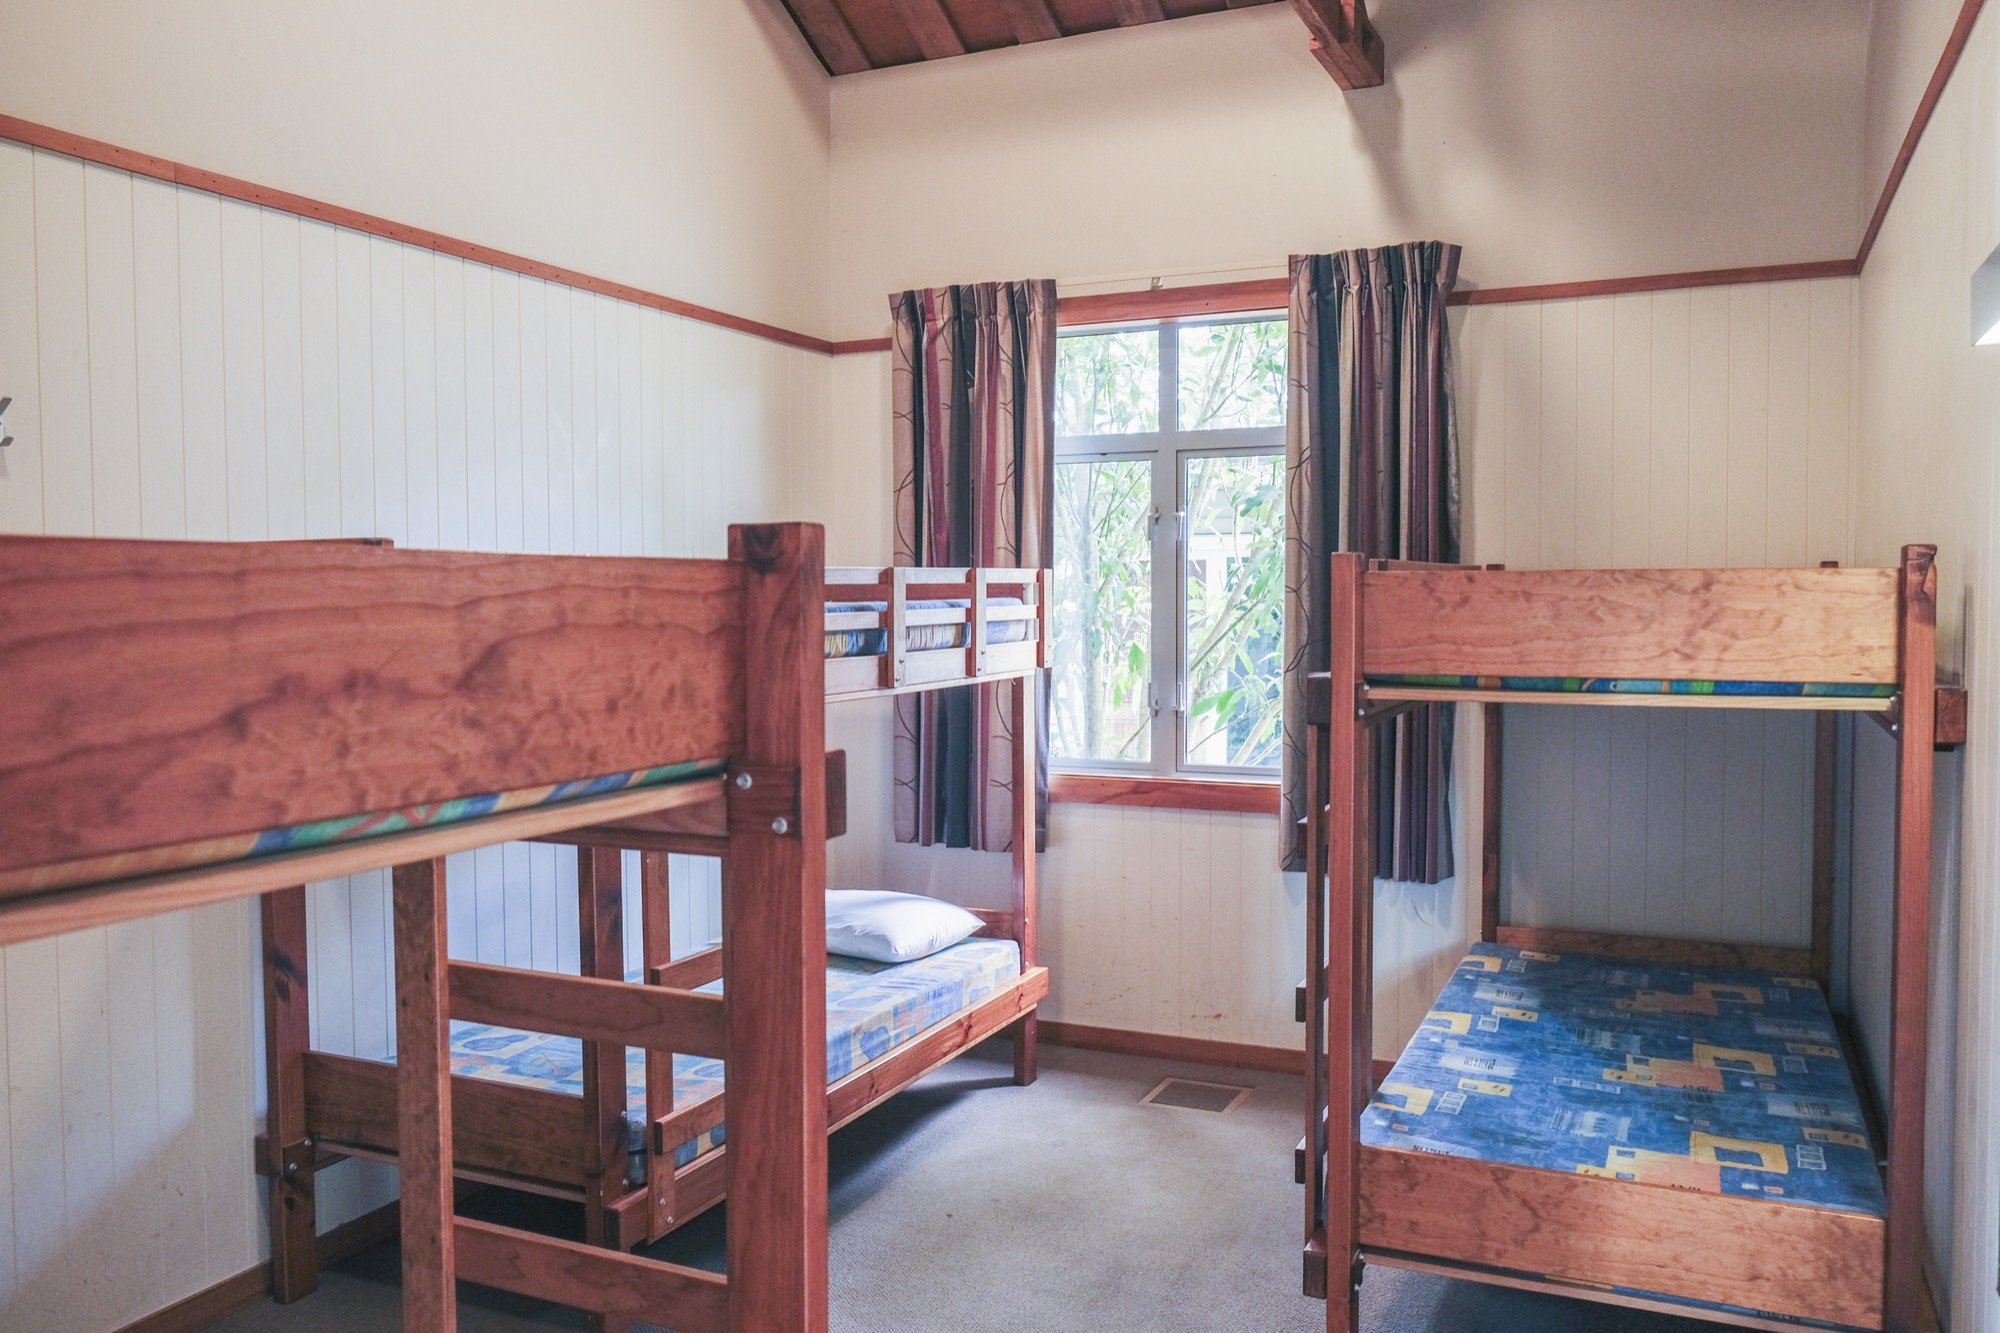 Silverstream Retreat groups accomodation, Forest Wing bunks